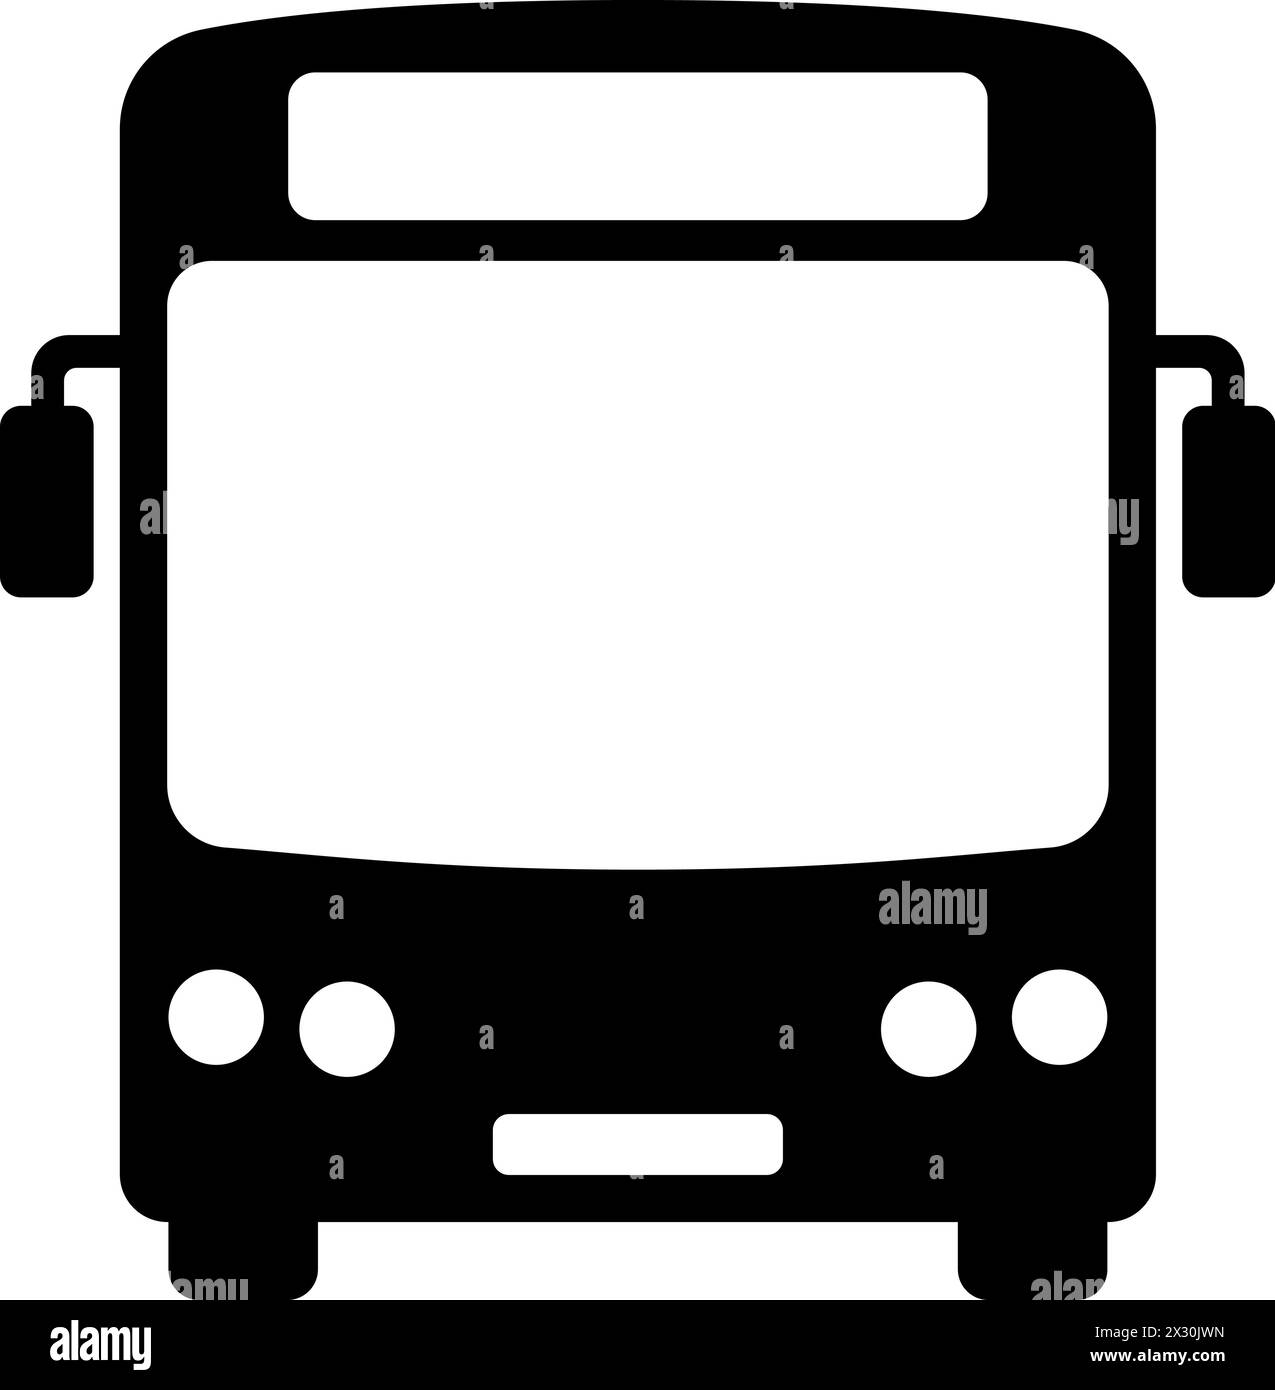 Flat bus icon as symbol for web page design of city passenger transport Stock Vector